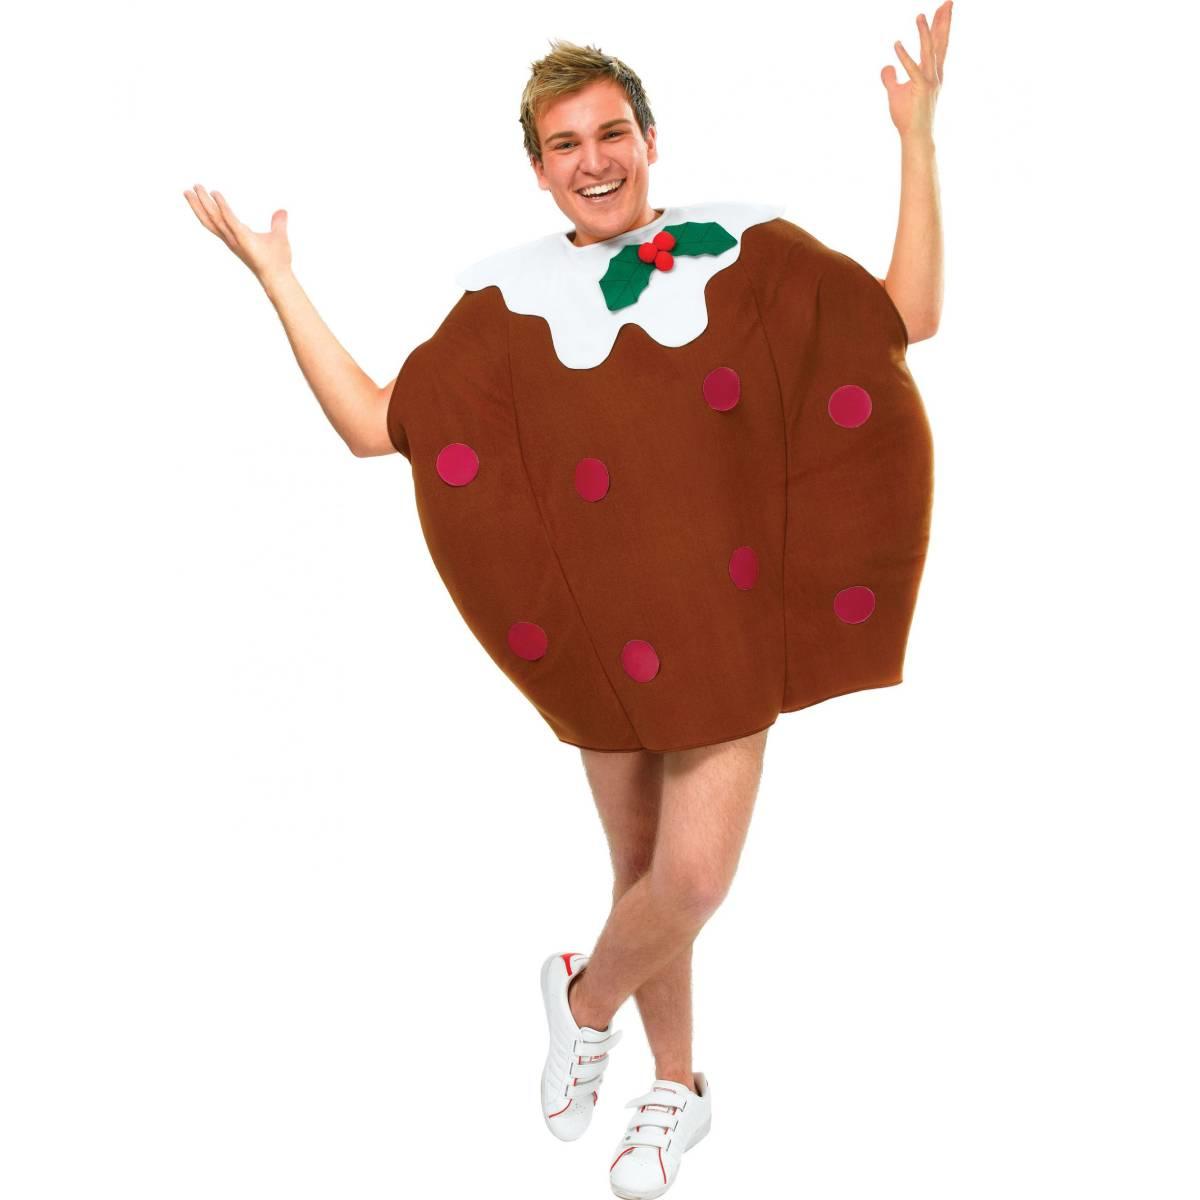 Christmas Pudding costume for adults by Bristol Novelties AC905 available here at Karnival Costumes online Christmas party shop